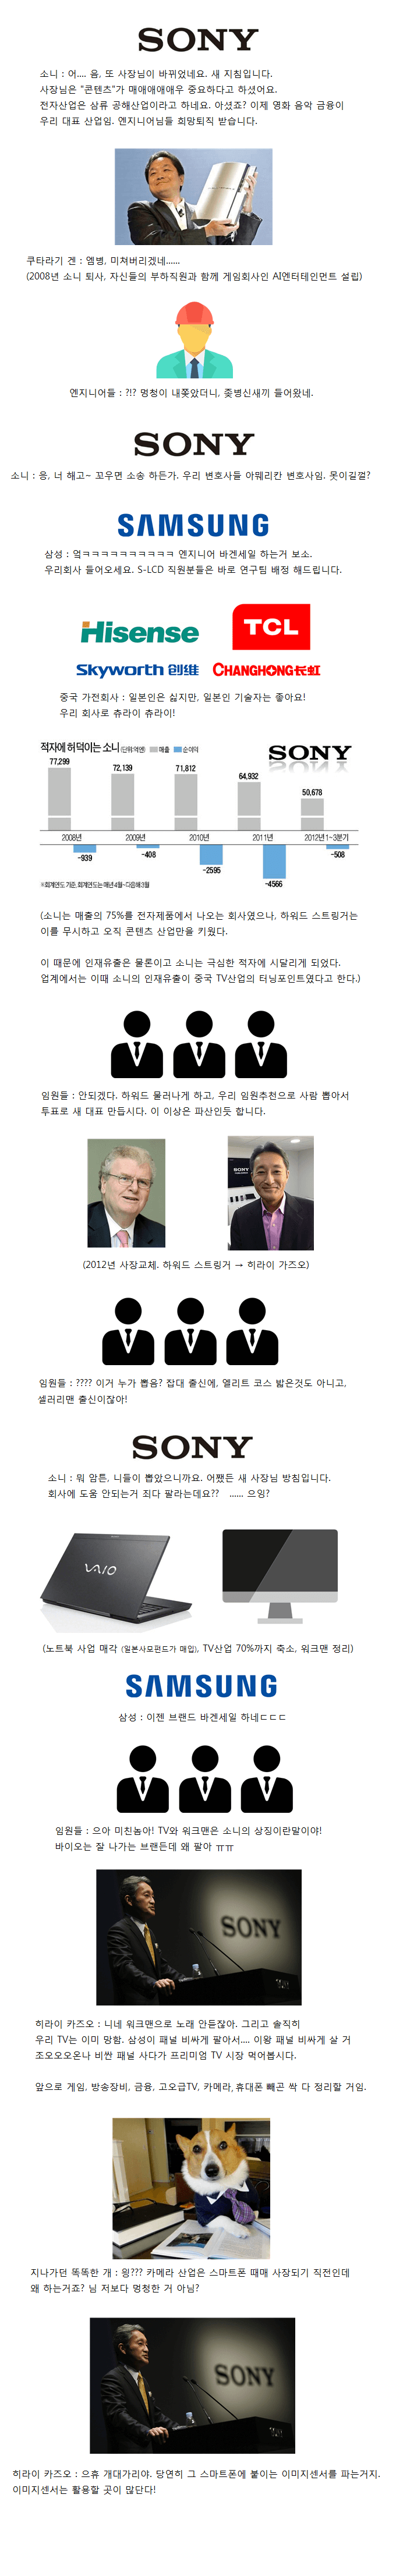 sony03.png